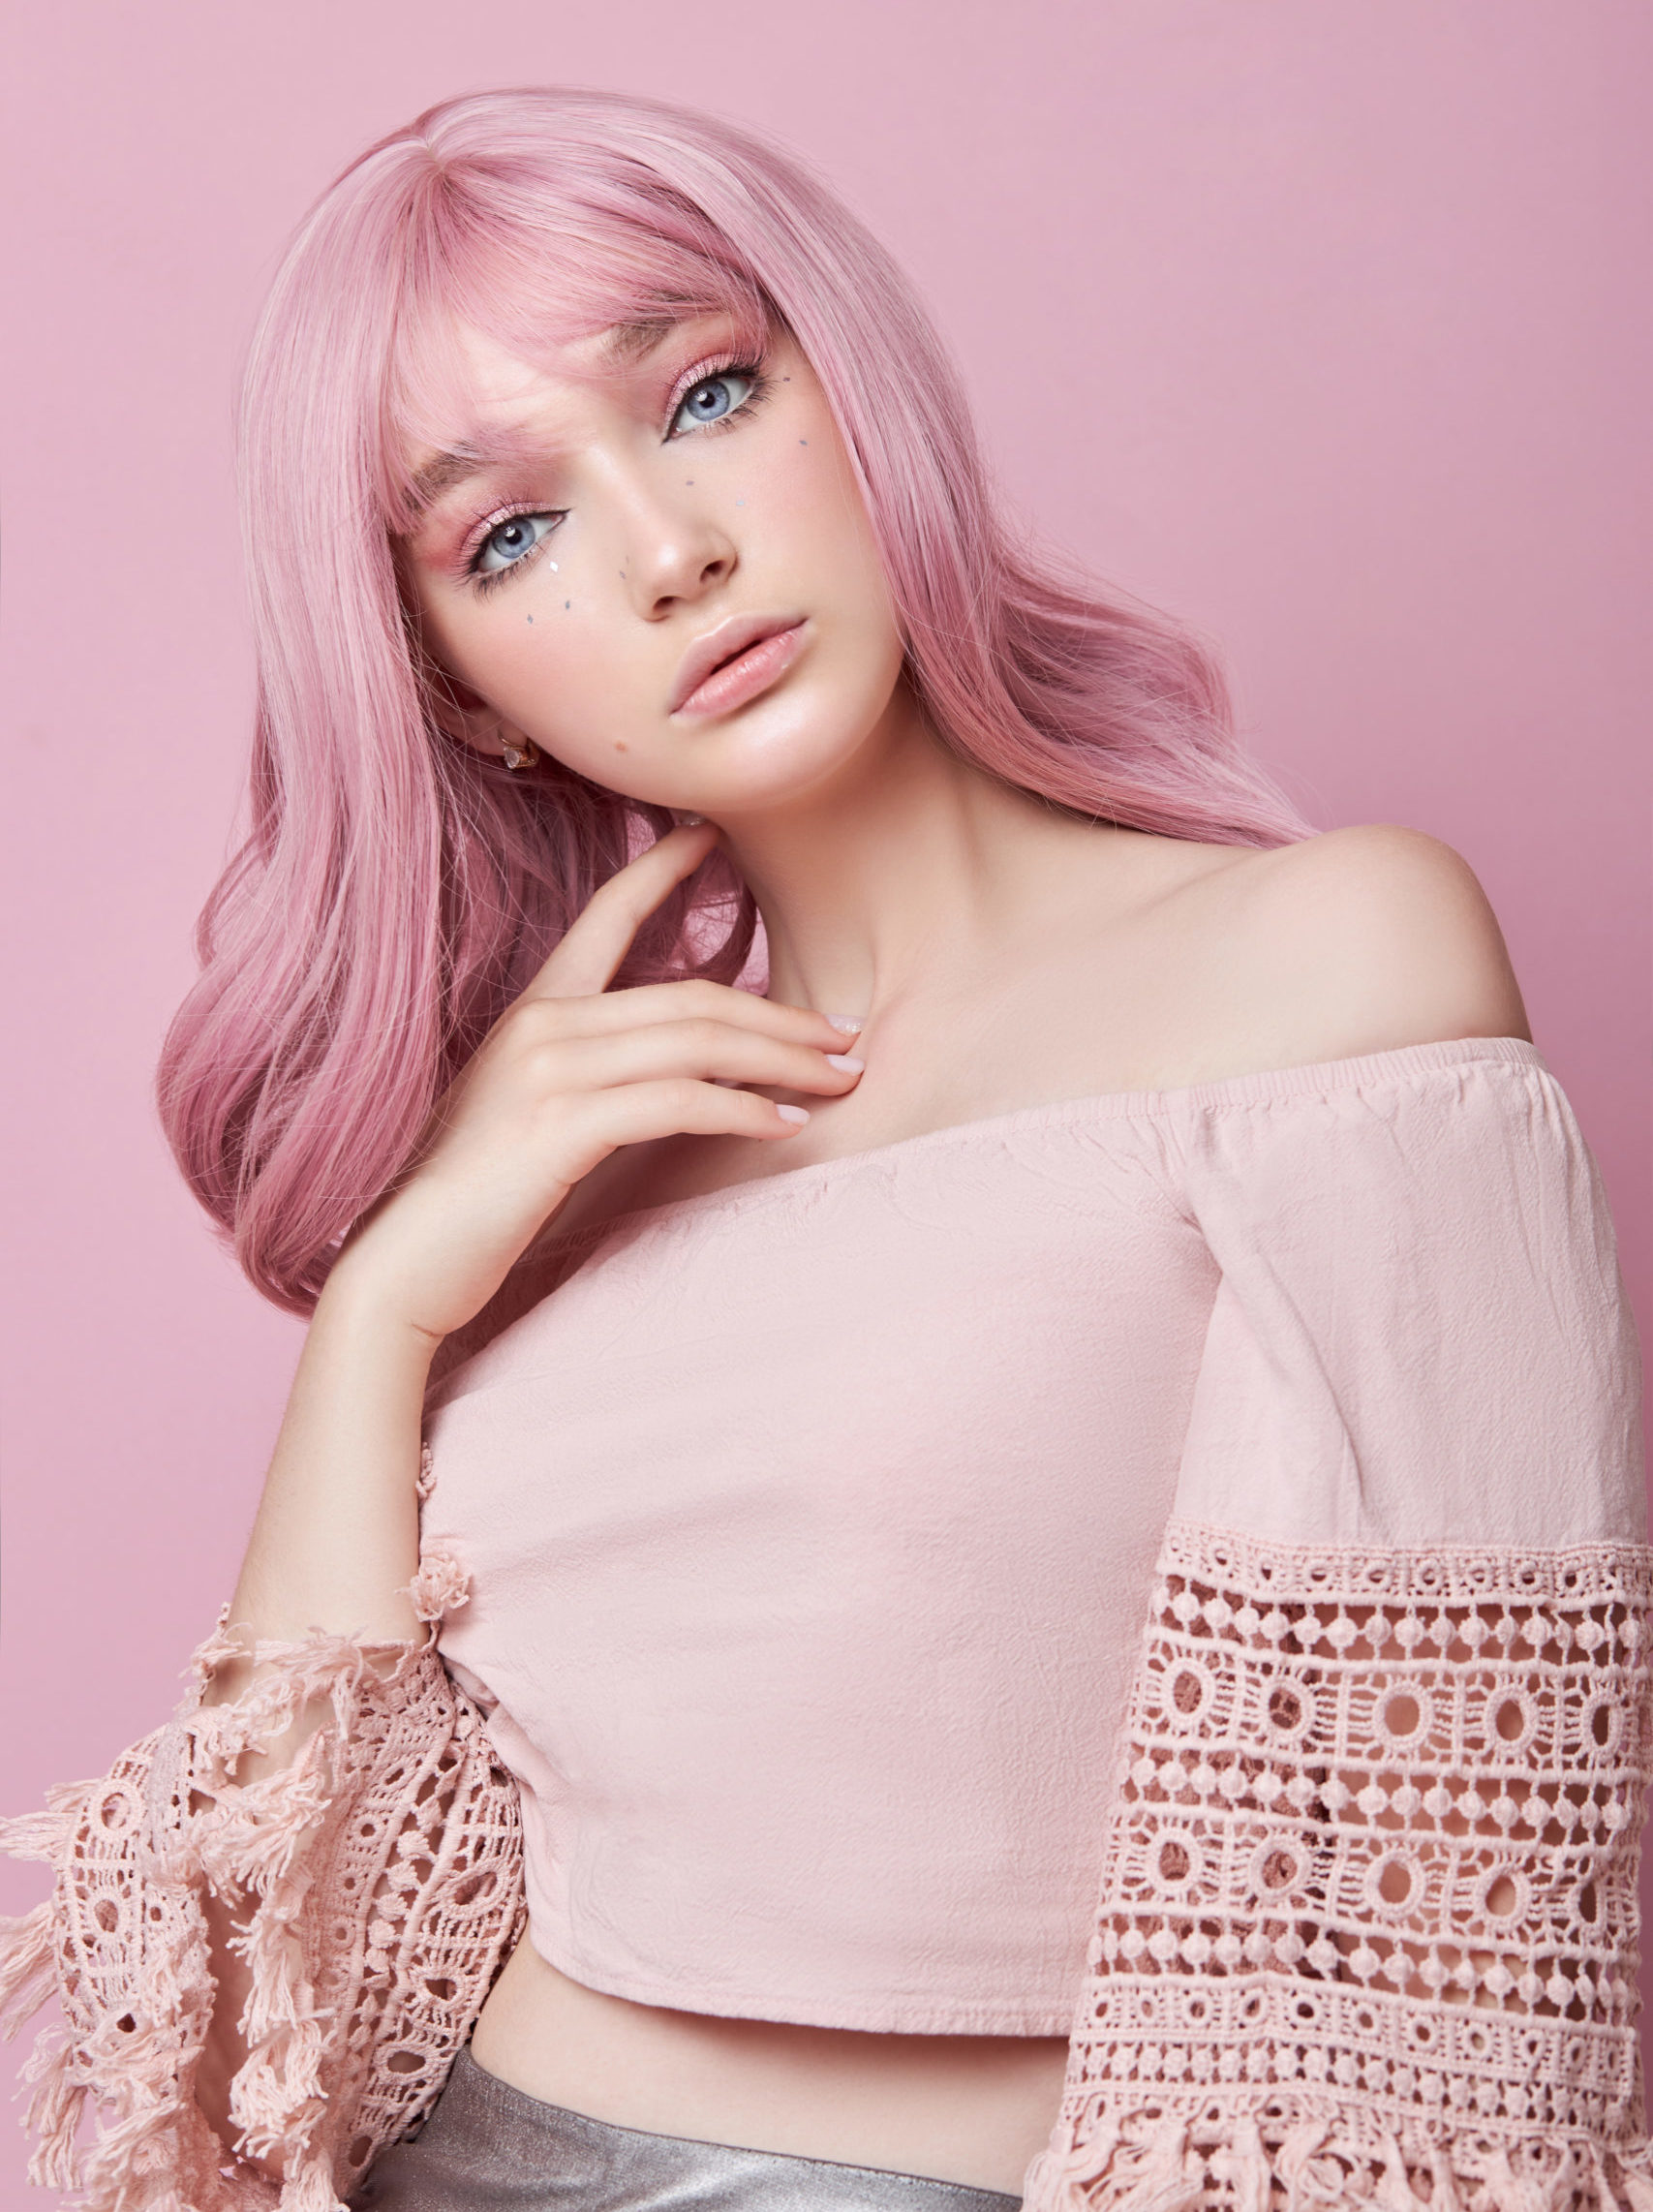 Dusty Rose Pink cool tone hair color